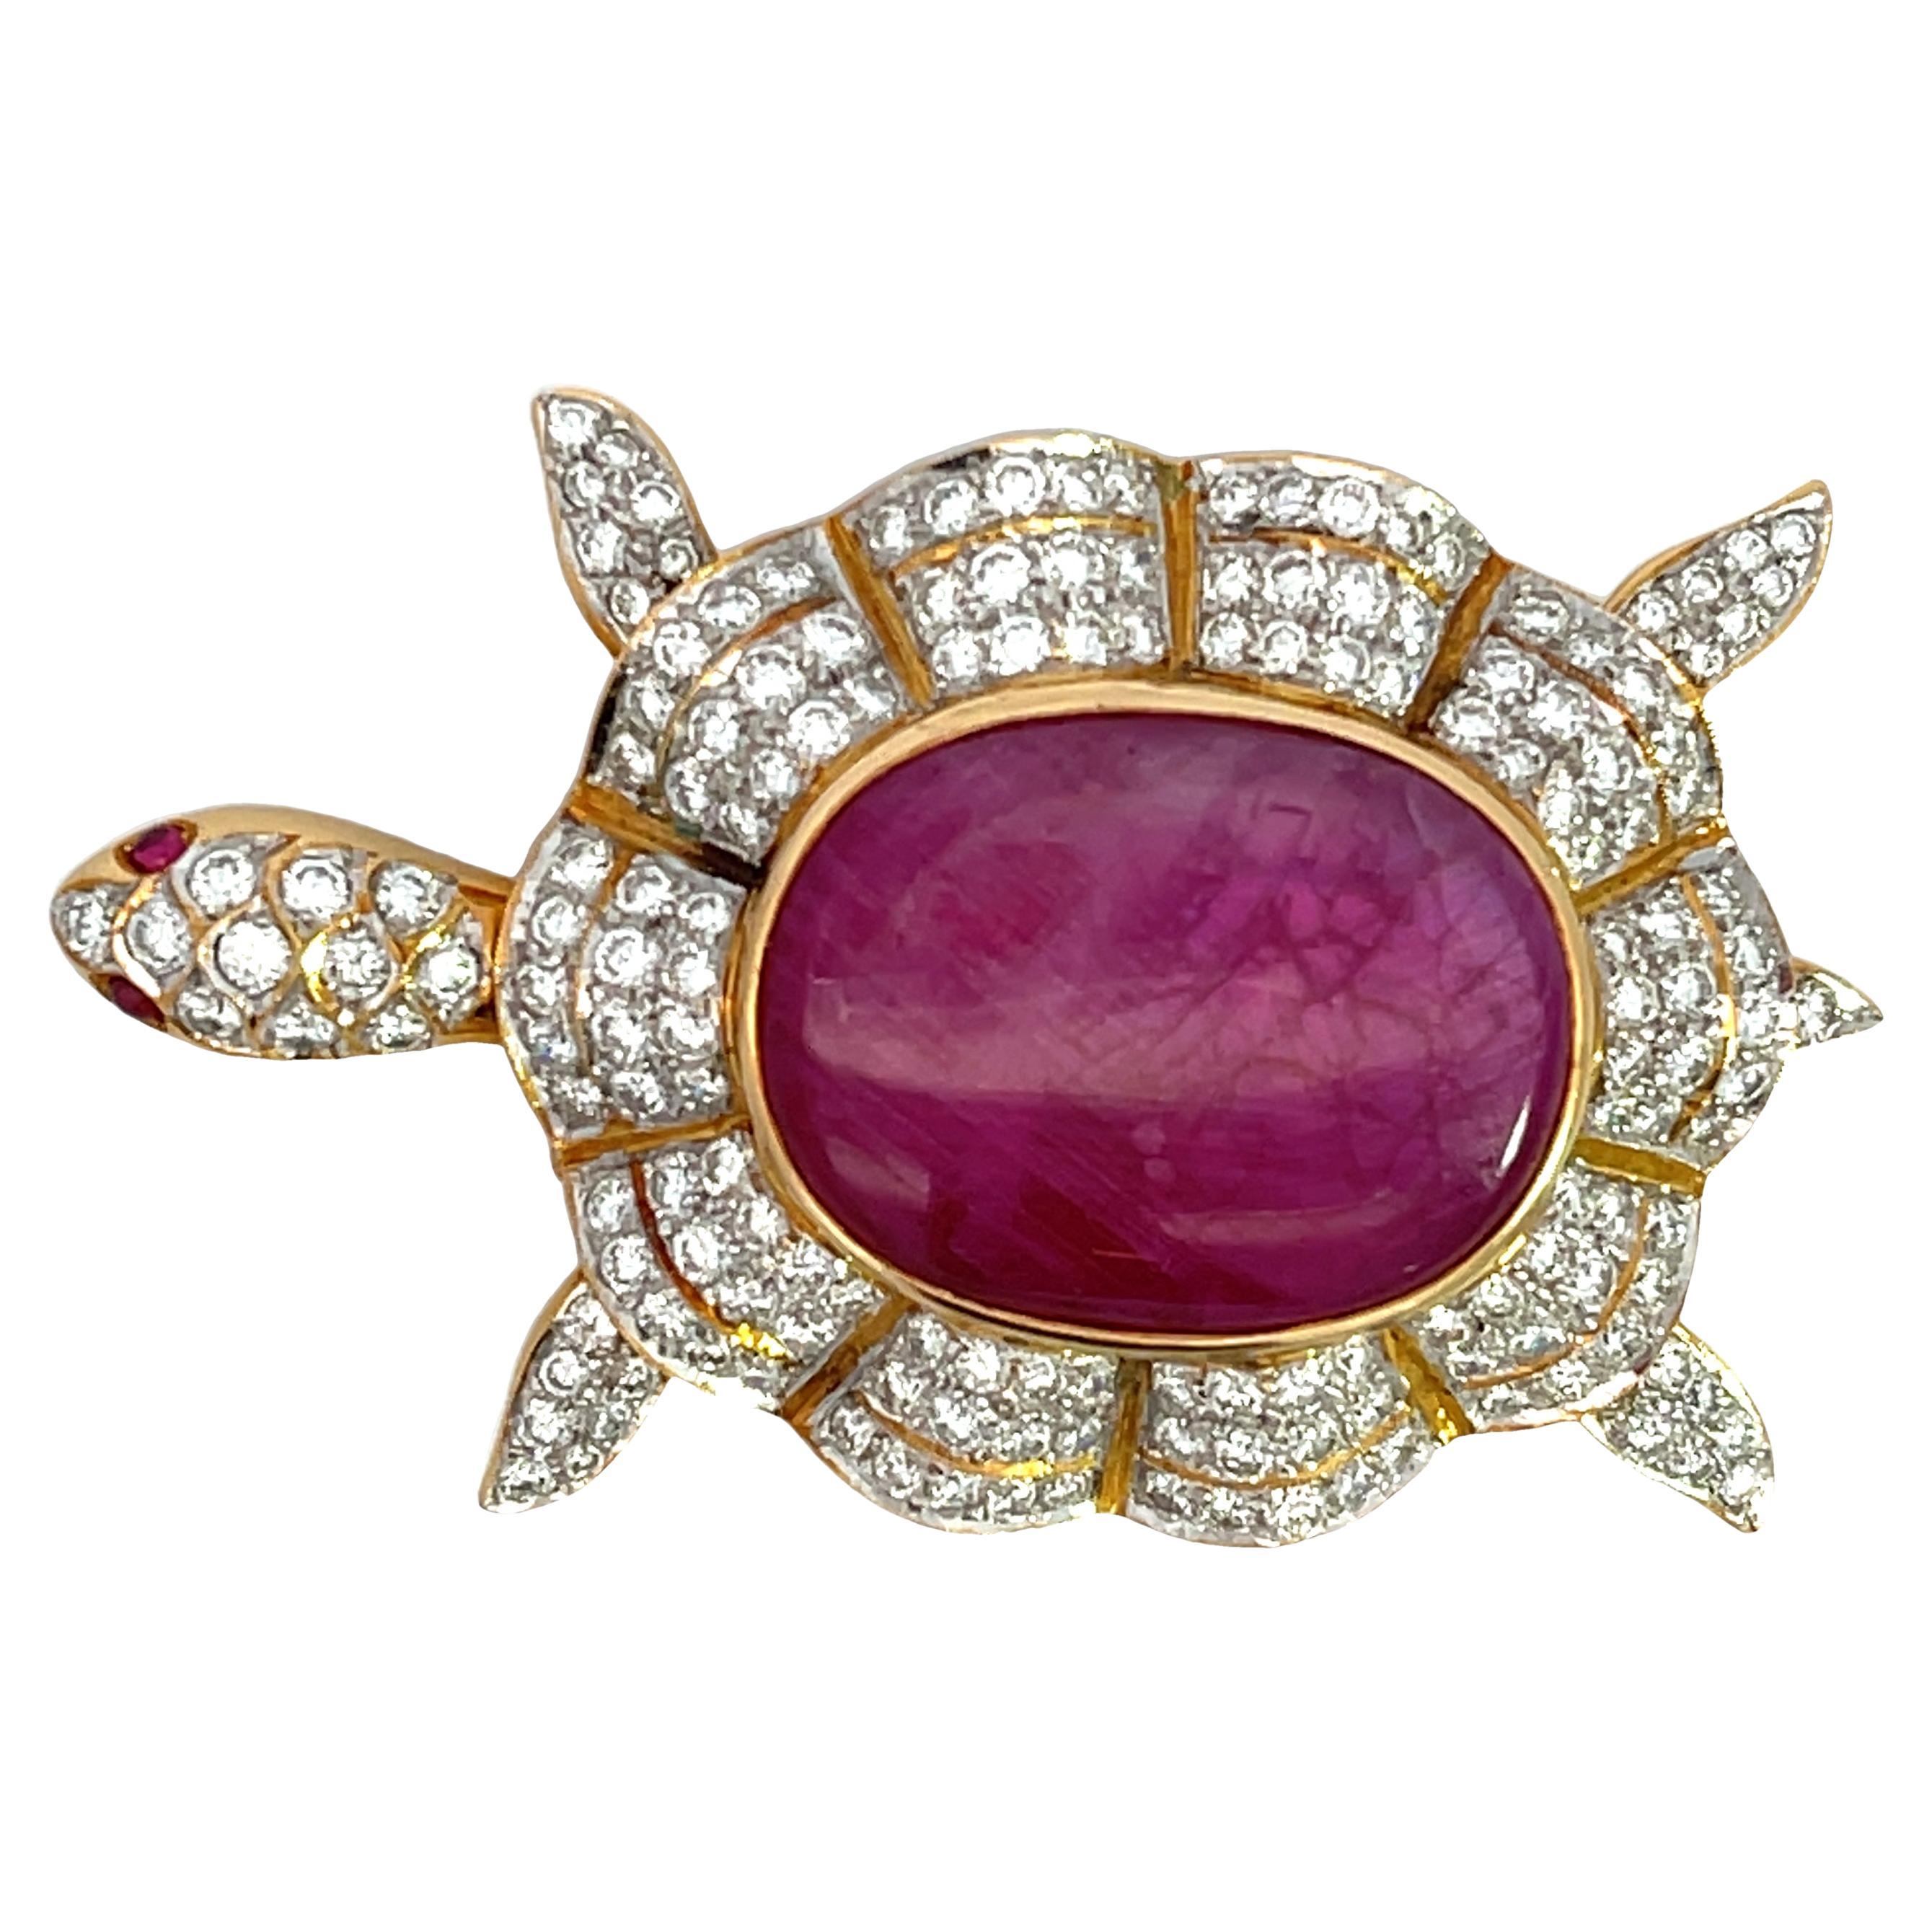 18K Yellow Gold 6.12ctw Diamond Turtle Brooch/Pendant with 44/1ctw Natural Ruby